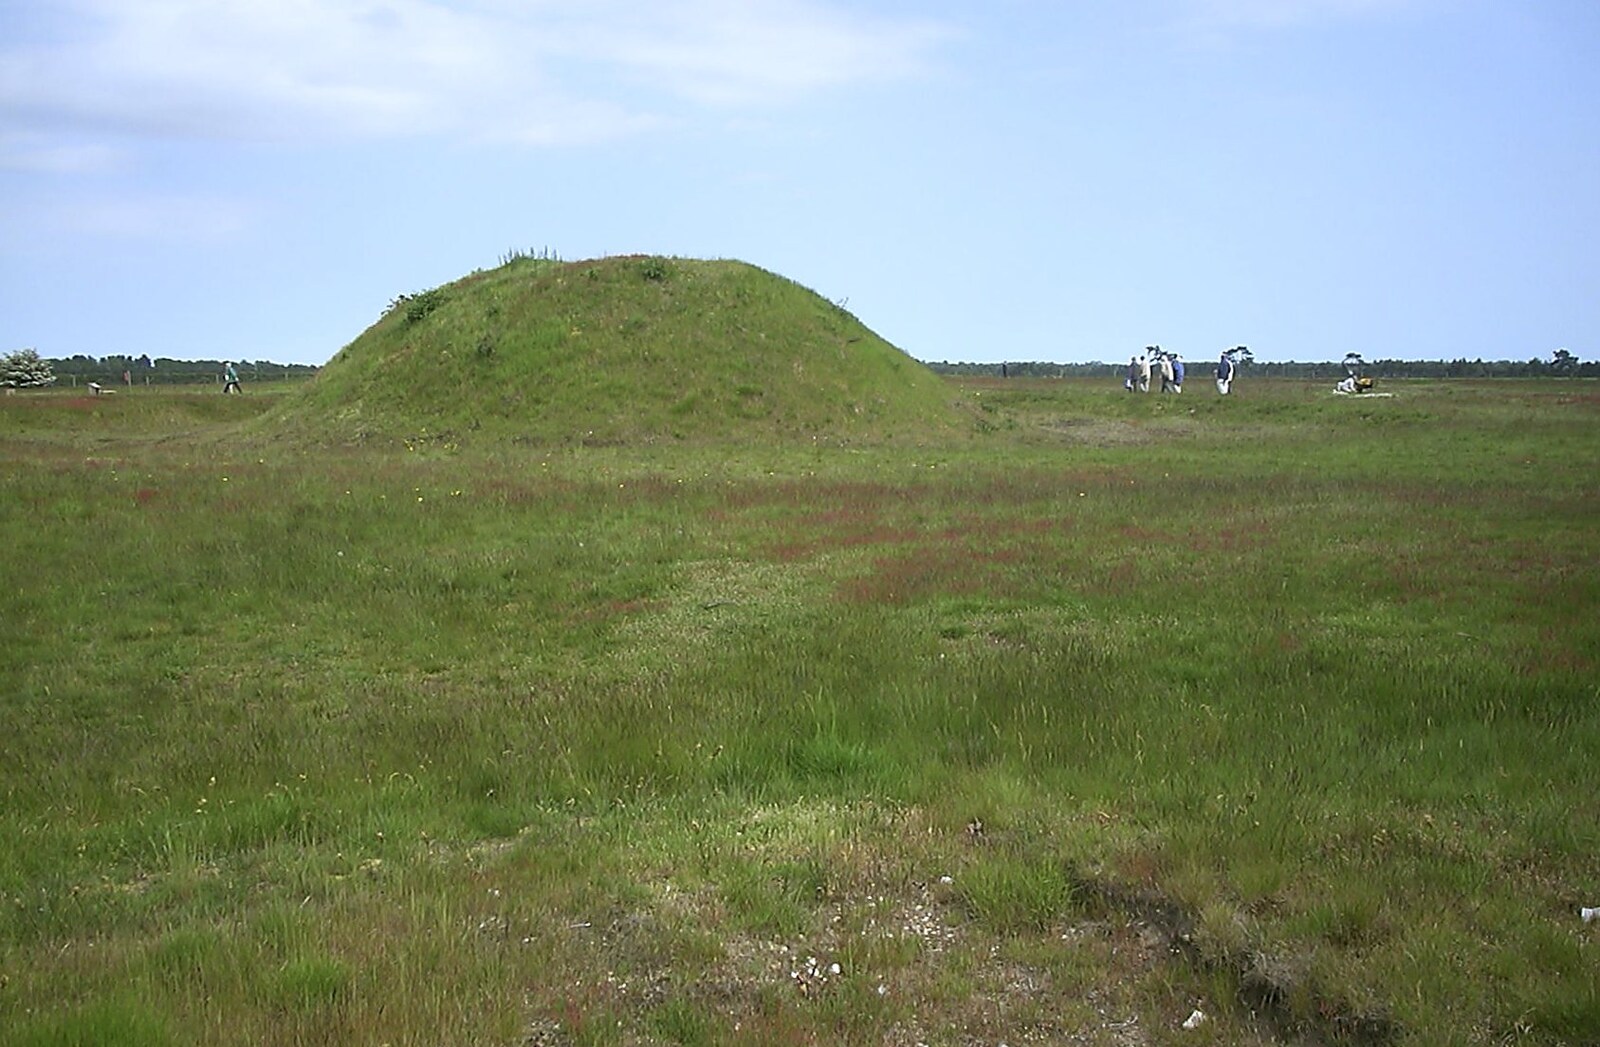 One of the Sutton Hoo mounds from Mother and Mike Visit, Aldringham, Suffolk - 26th May 2004